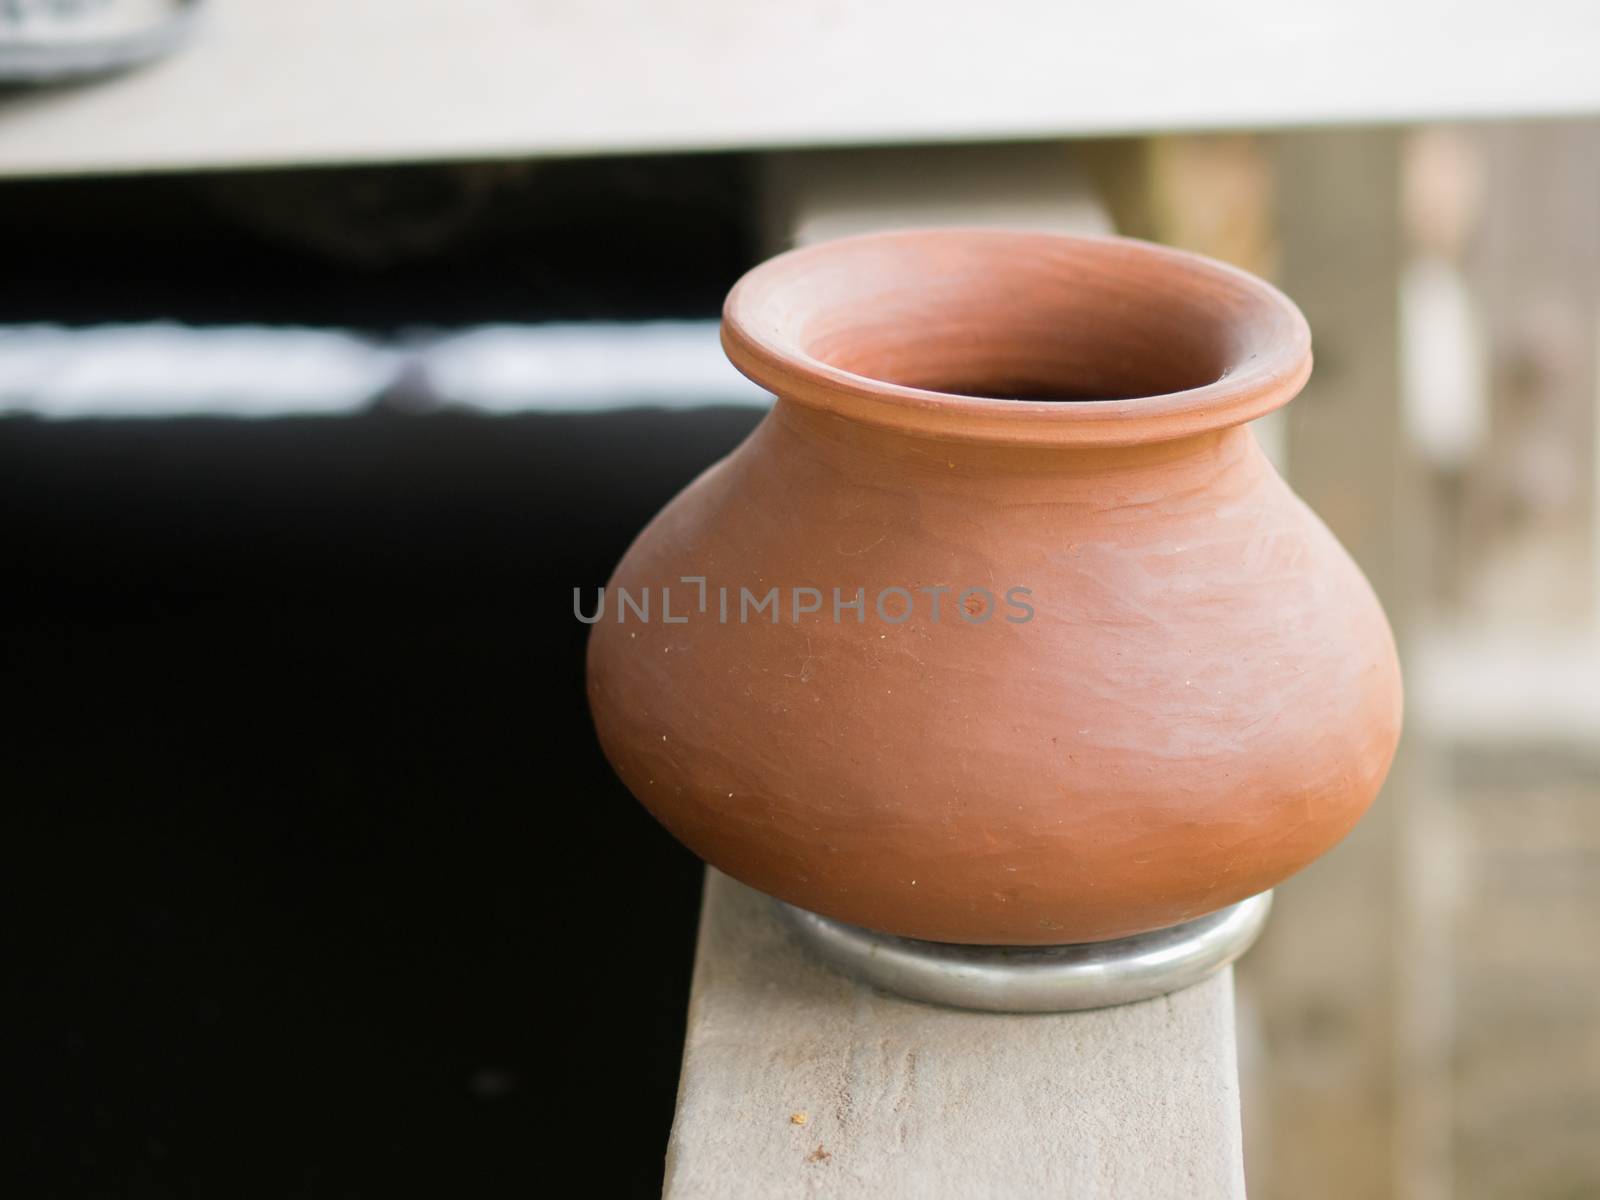 COLOR PHOTO OF WATER POT MADE OF CERAMIC